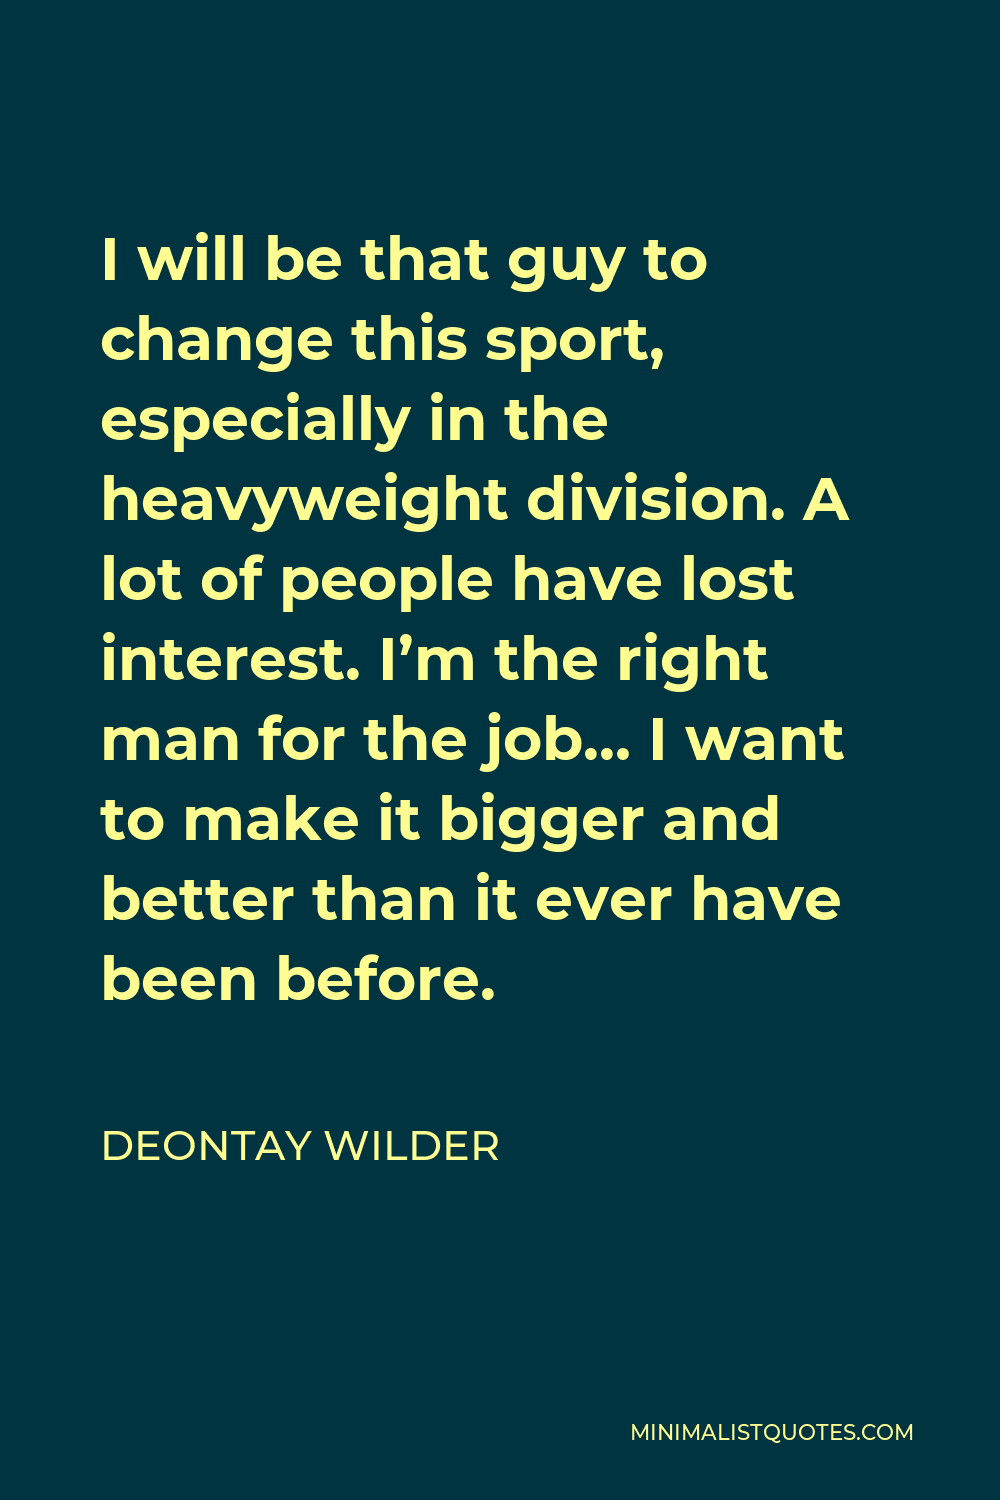 Deontay Wilder Quote - I will be that guy to change this sport, especially in the heavyweight division. A lot of people have lost interest. I’m the right man for the job… I want to make it bigger and better than it ever have been before.